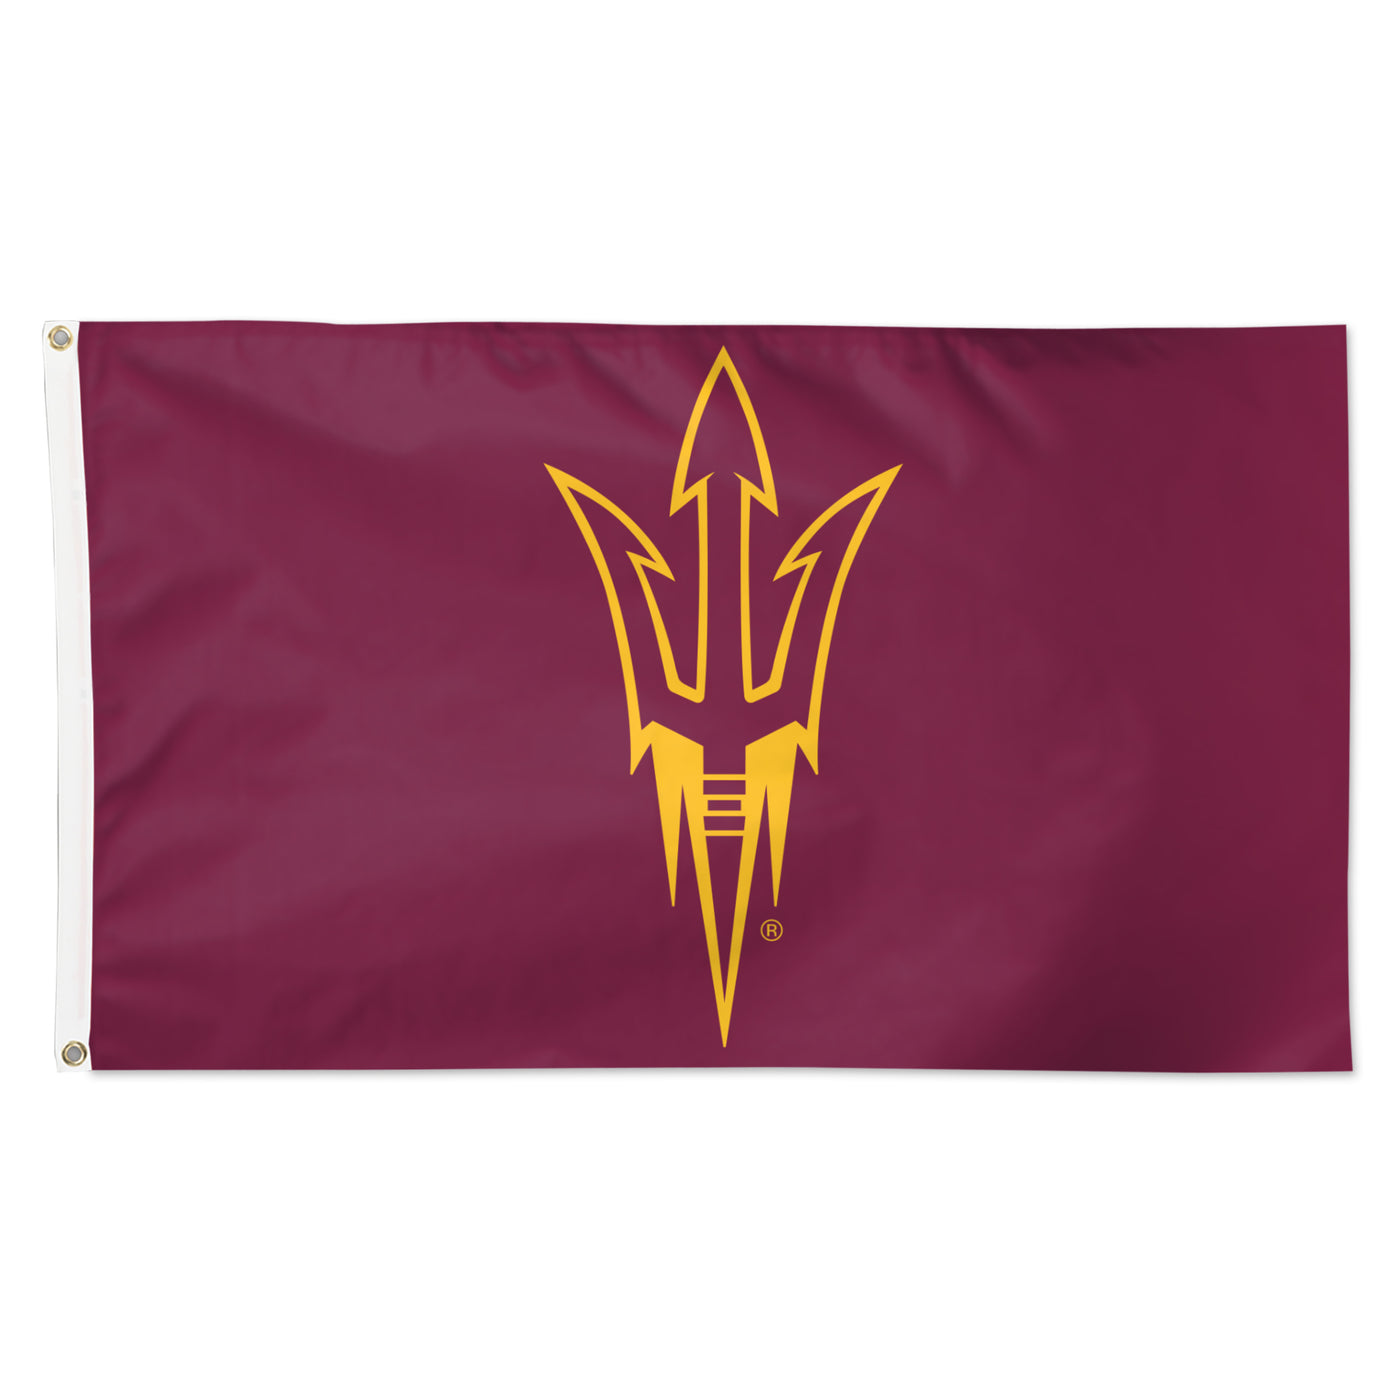 ASU maroon flag with gold outline of a pitchfork in the center. 